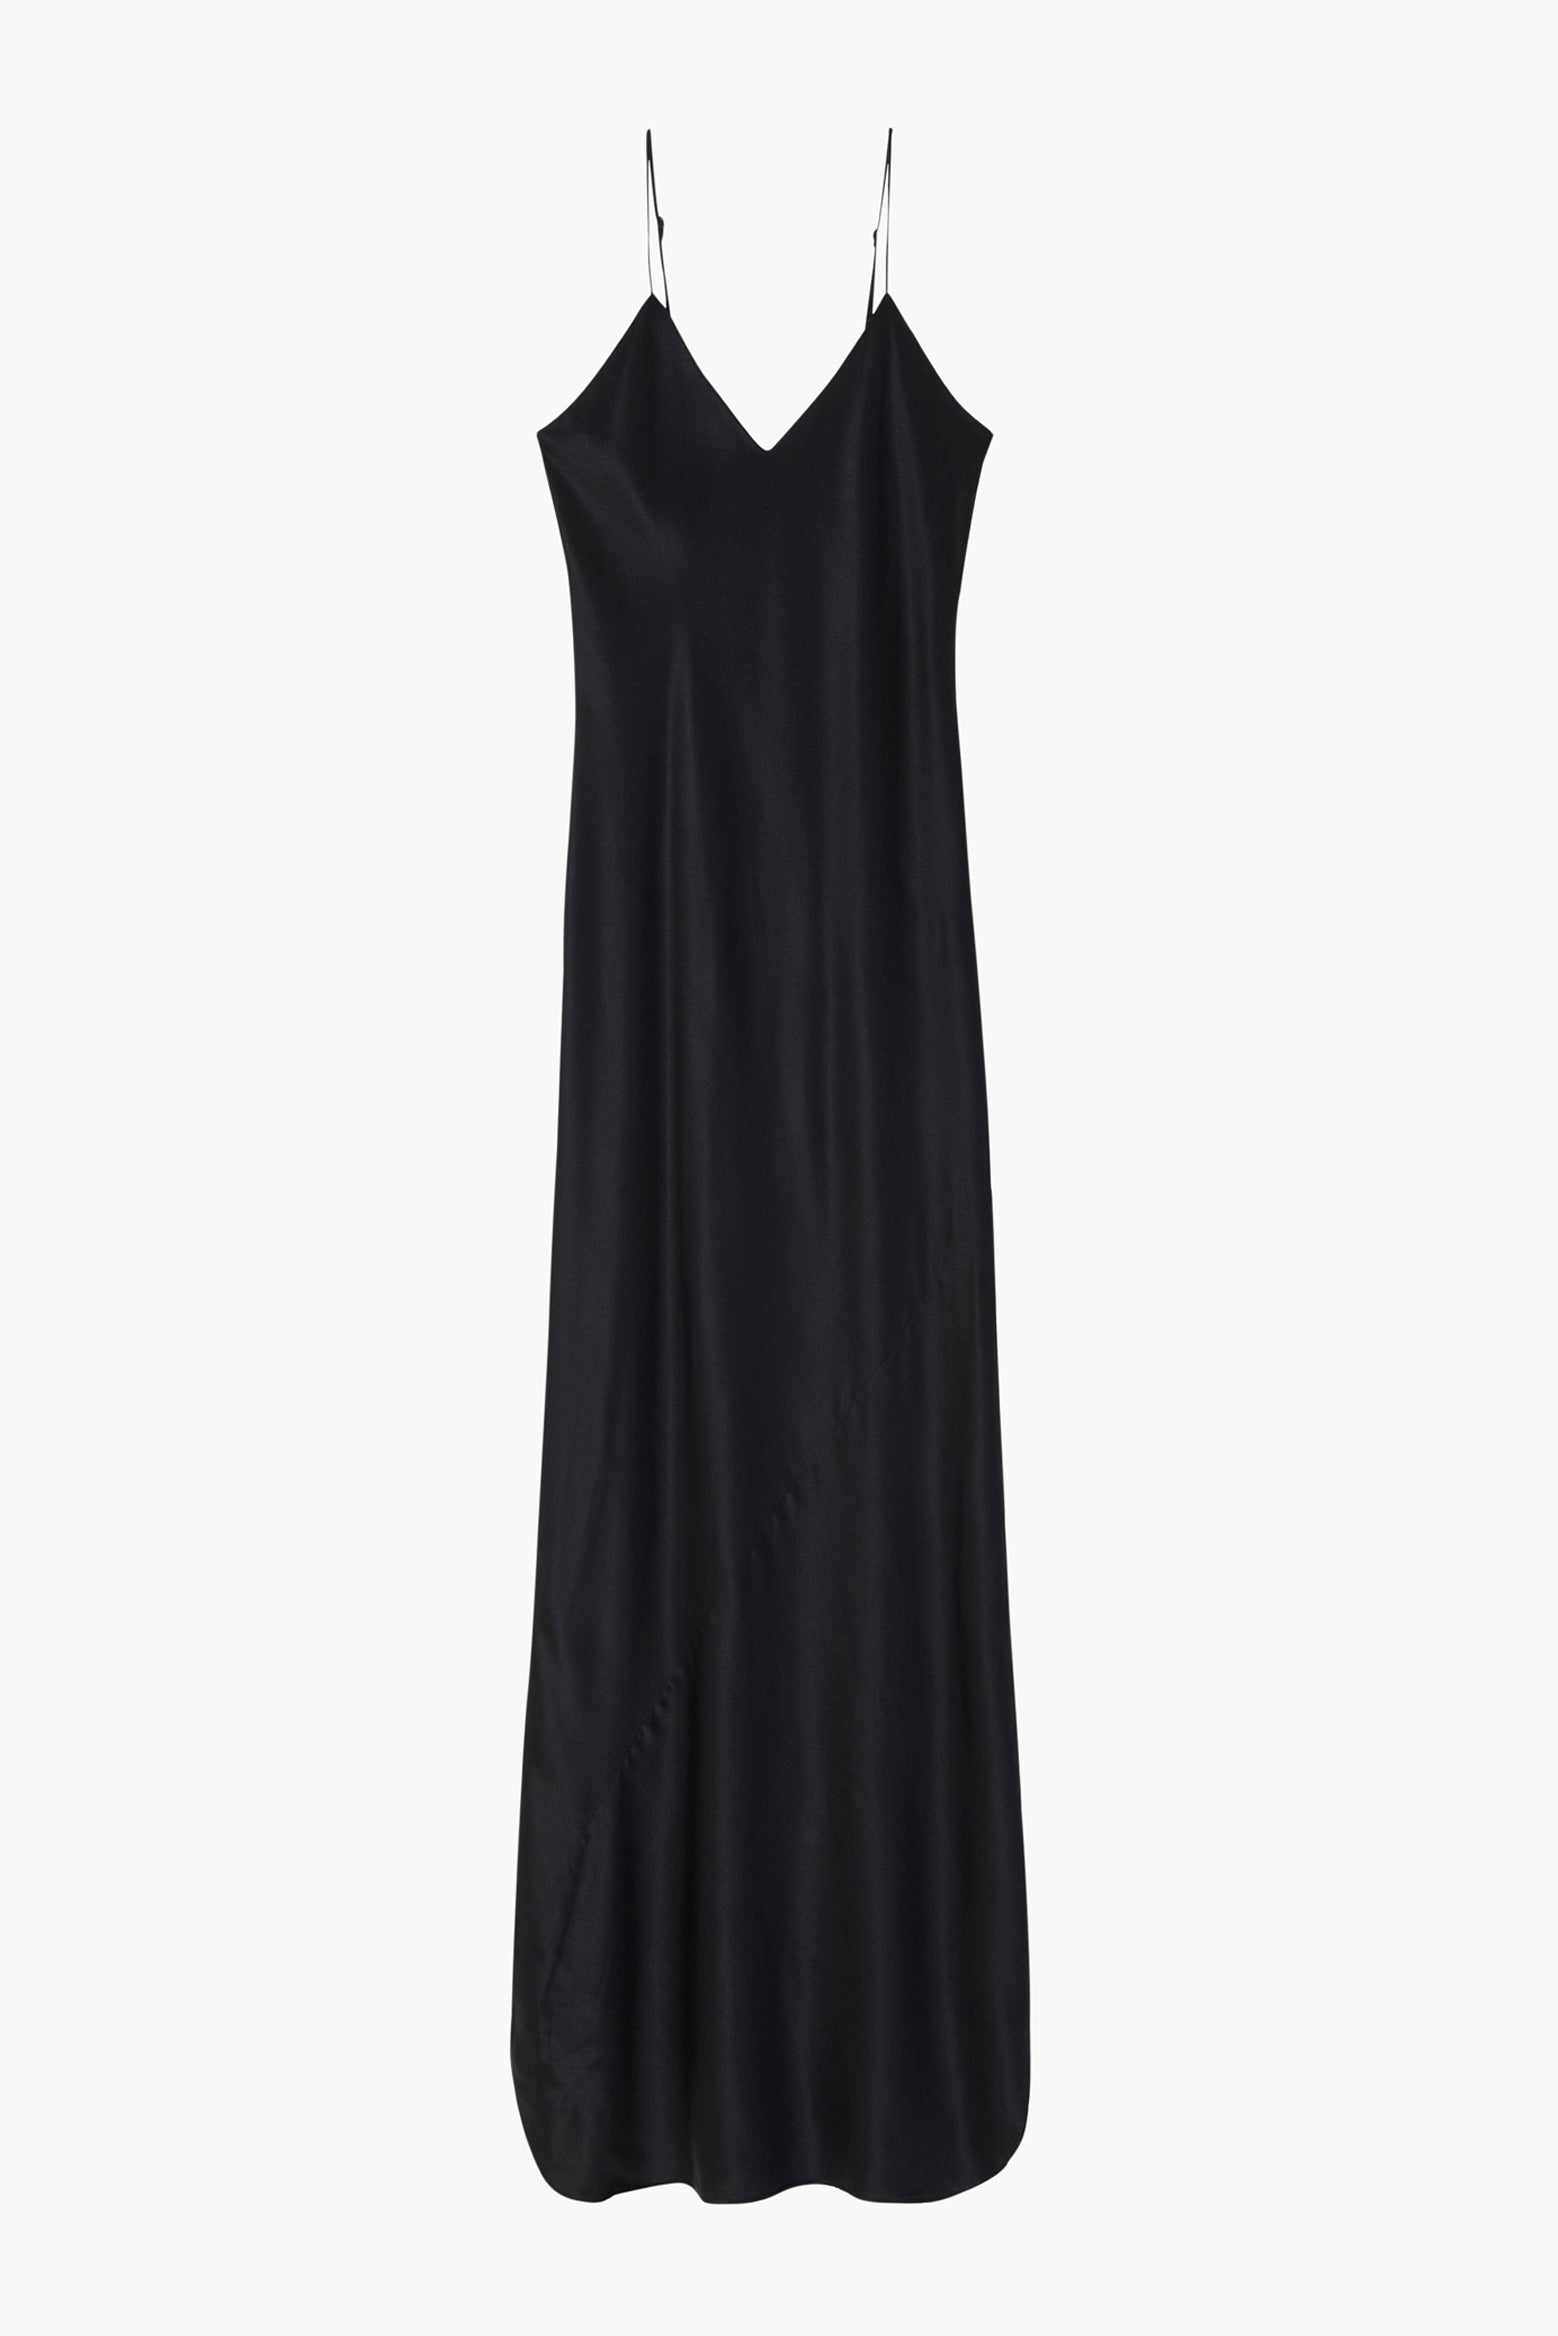 The Nili Lotan Cami Gown in Black from The New Trend Australia